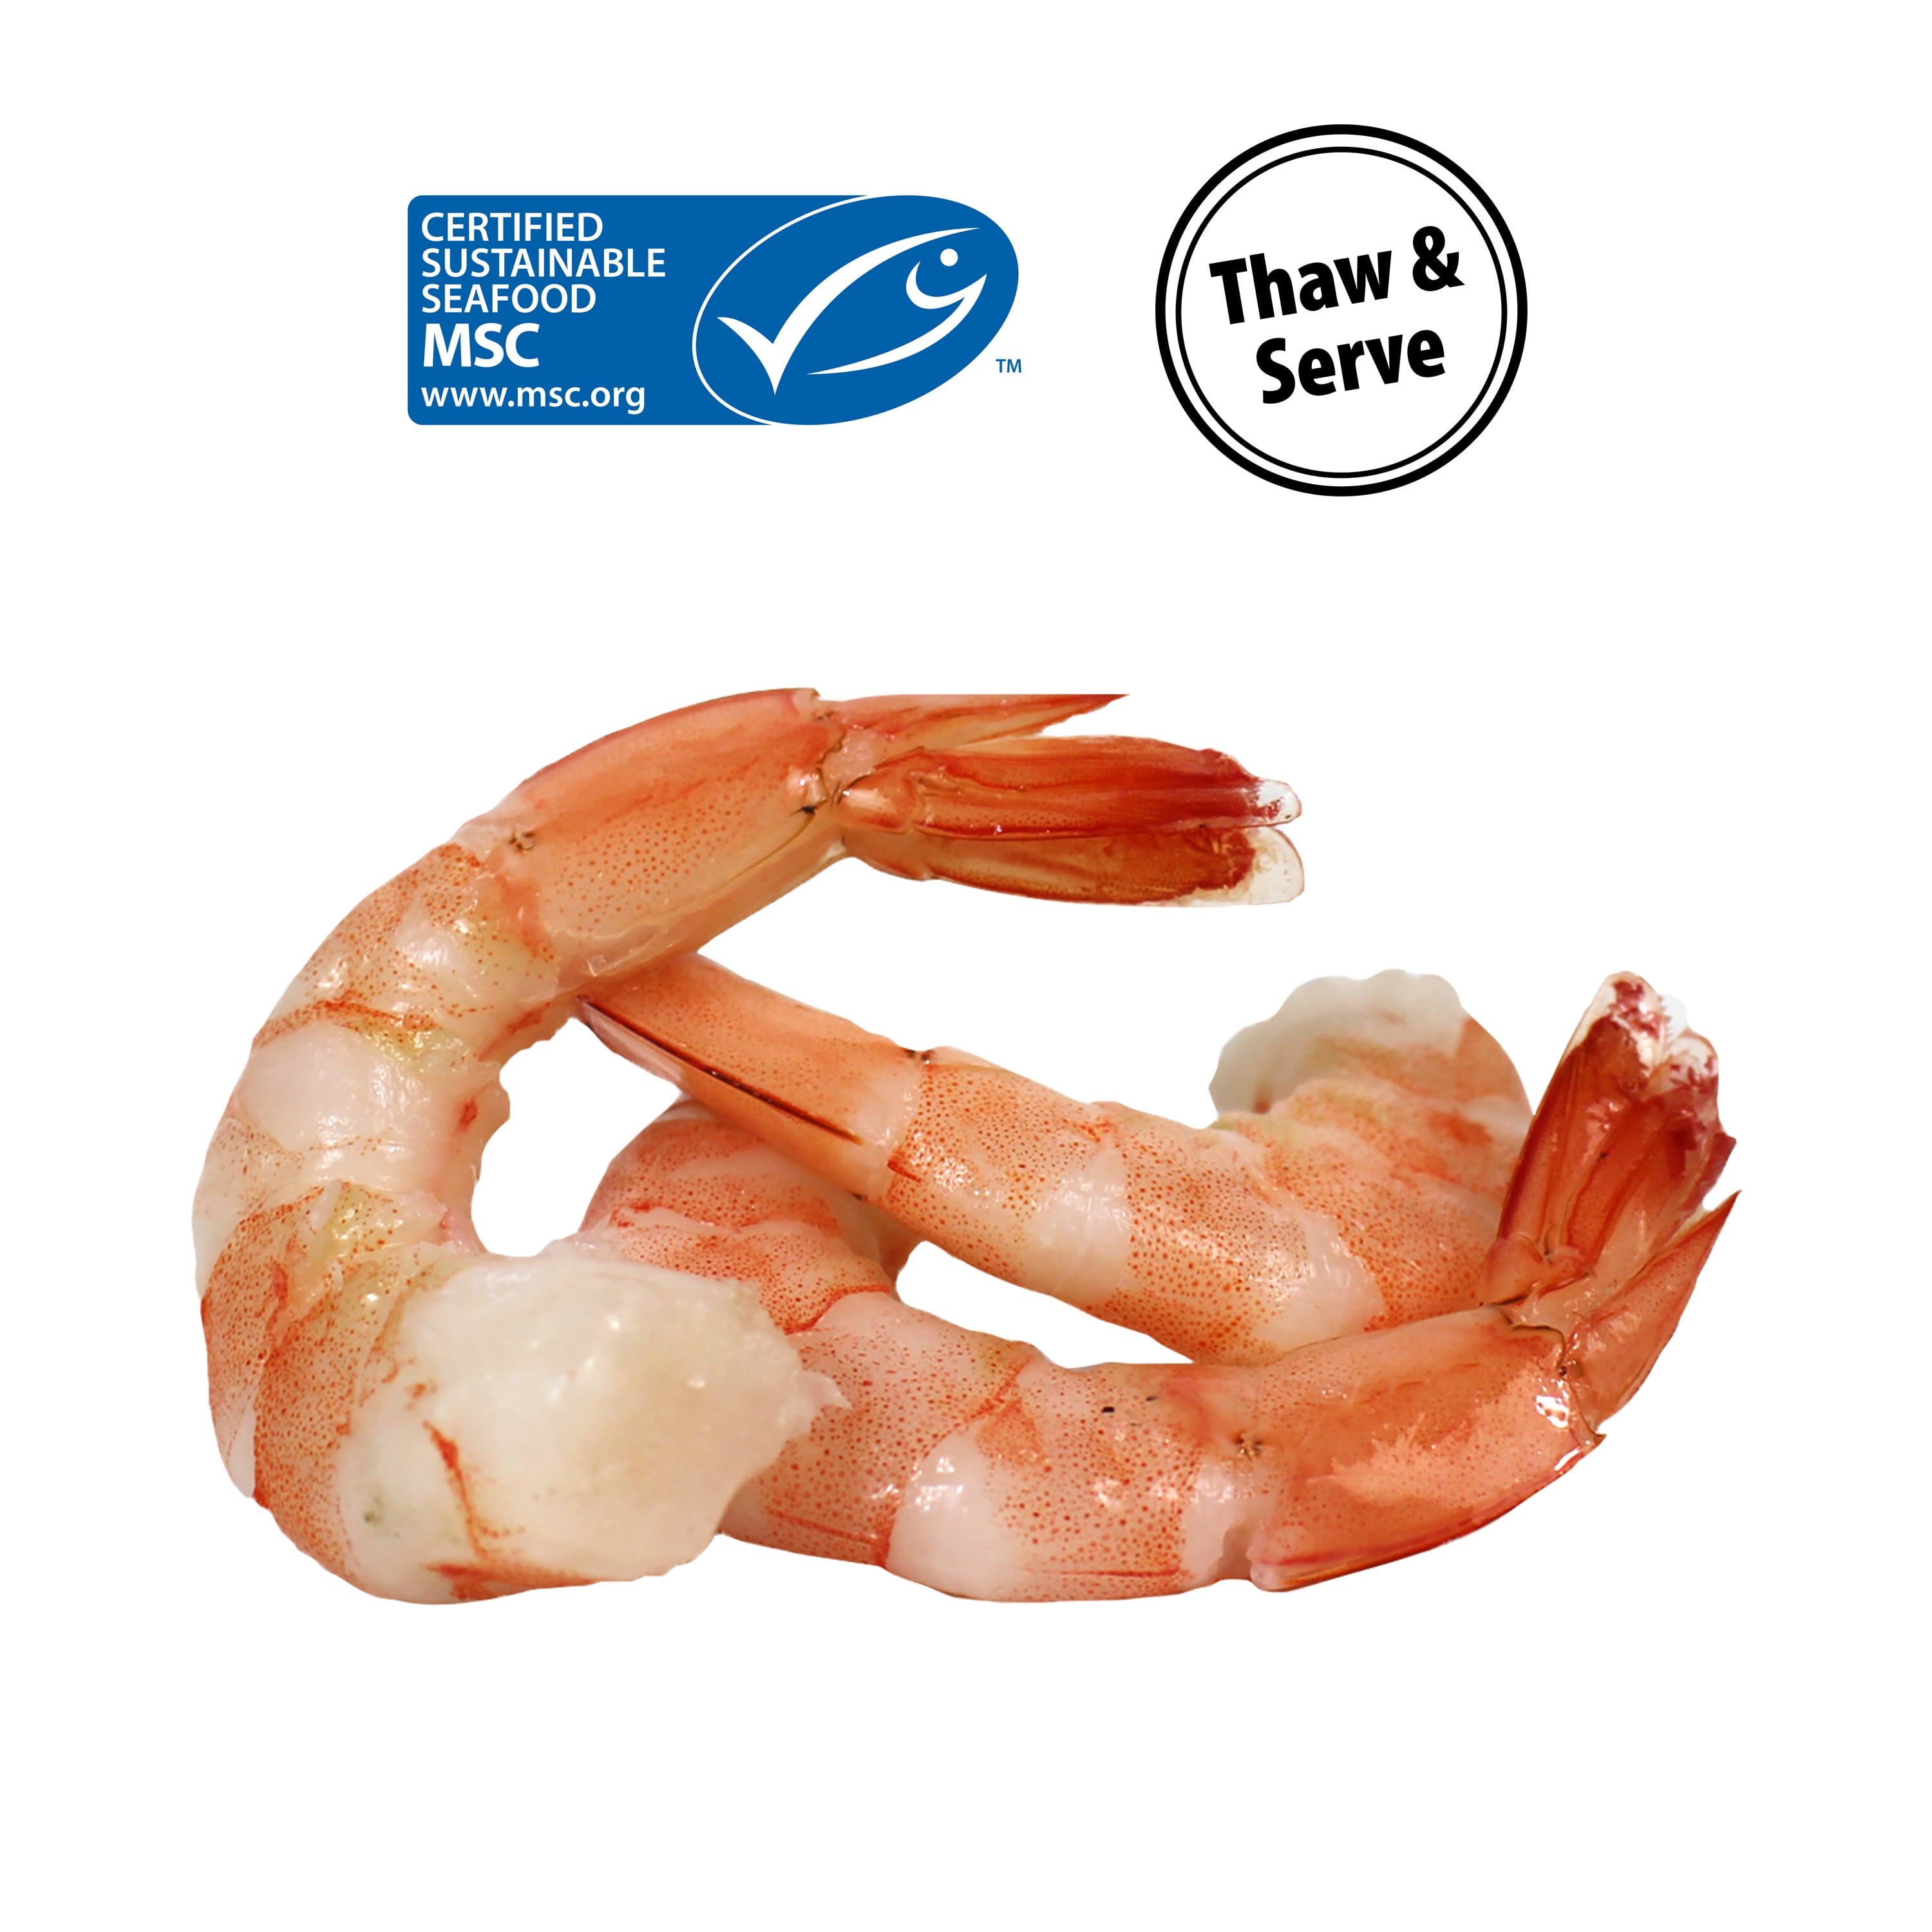 Sam's Choice Premium Cooked Cocktail Shrimp, Tail-On Thaw and Serve, 38 pcs